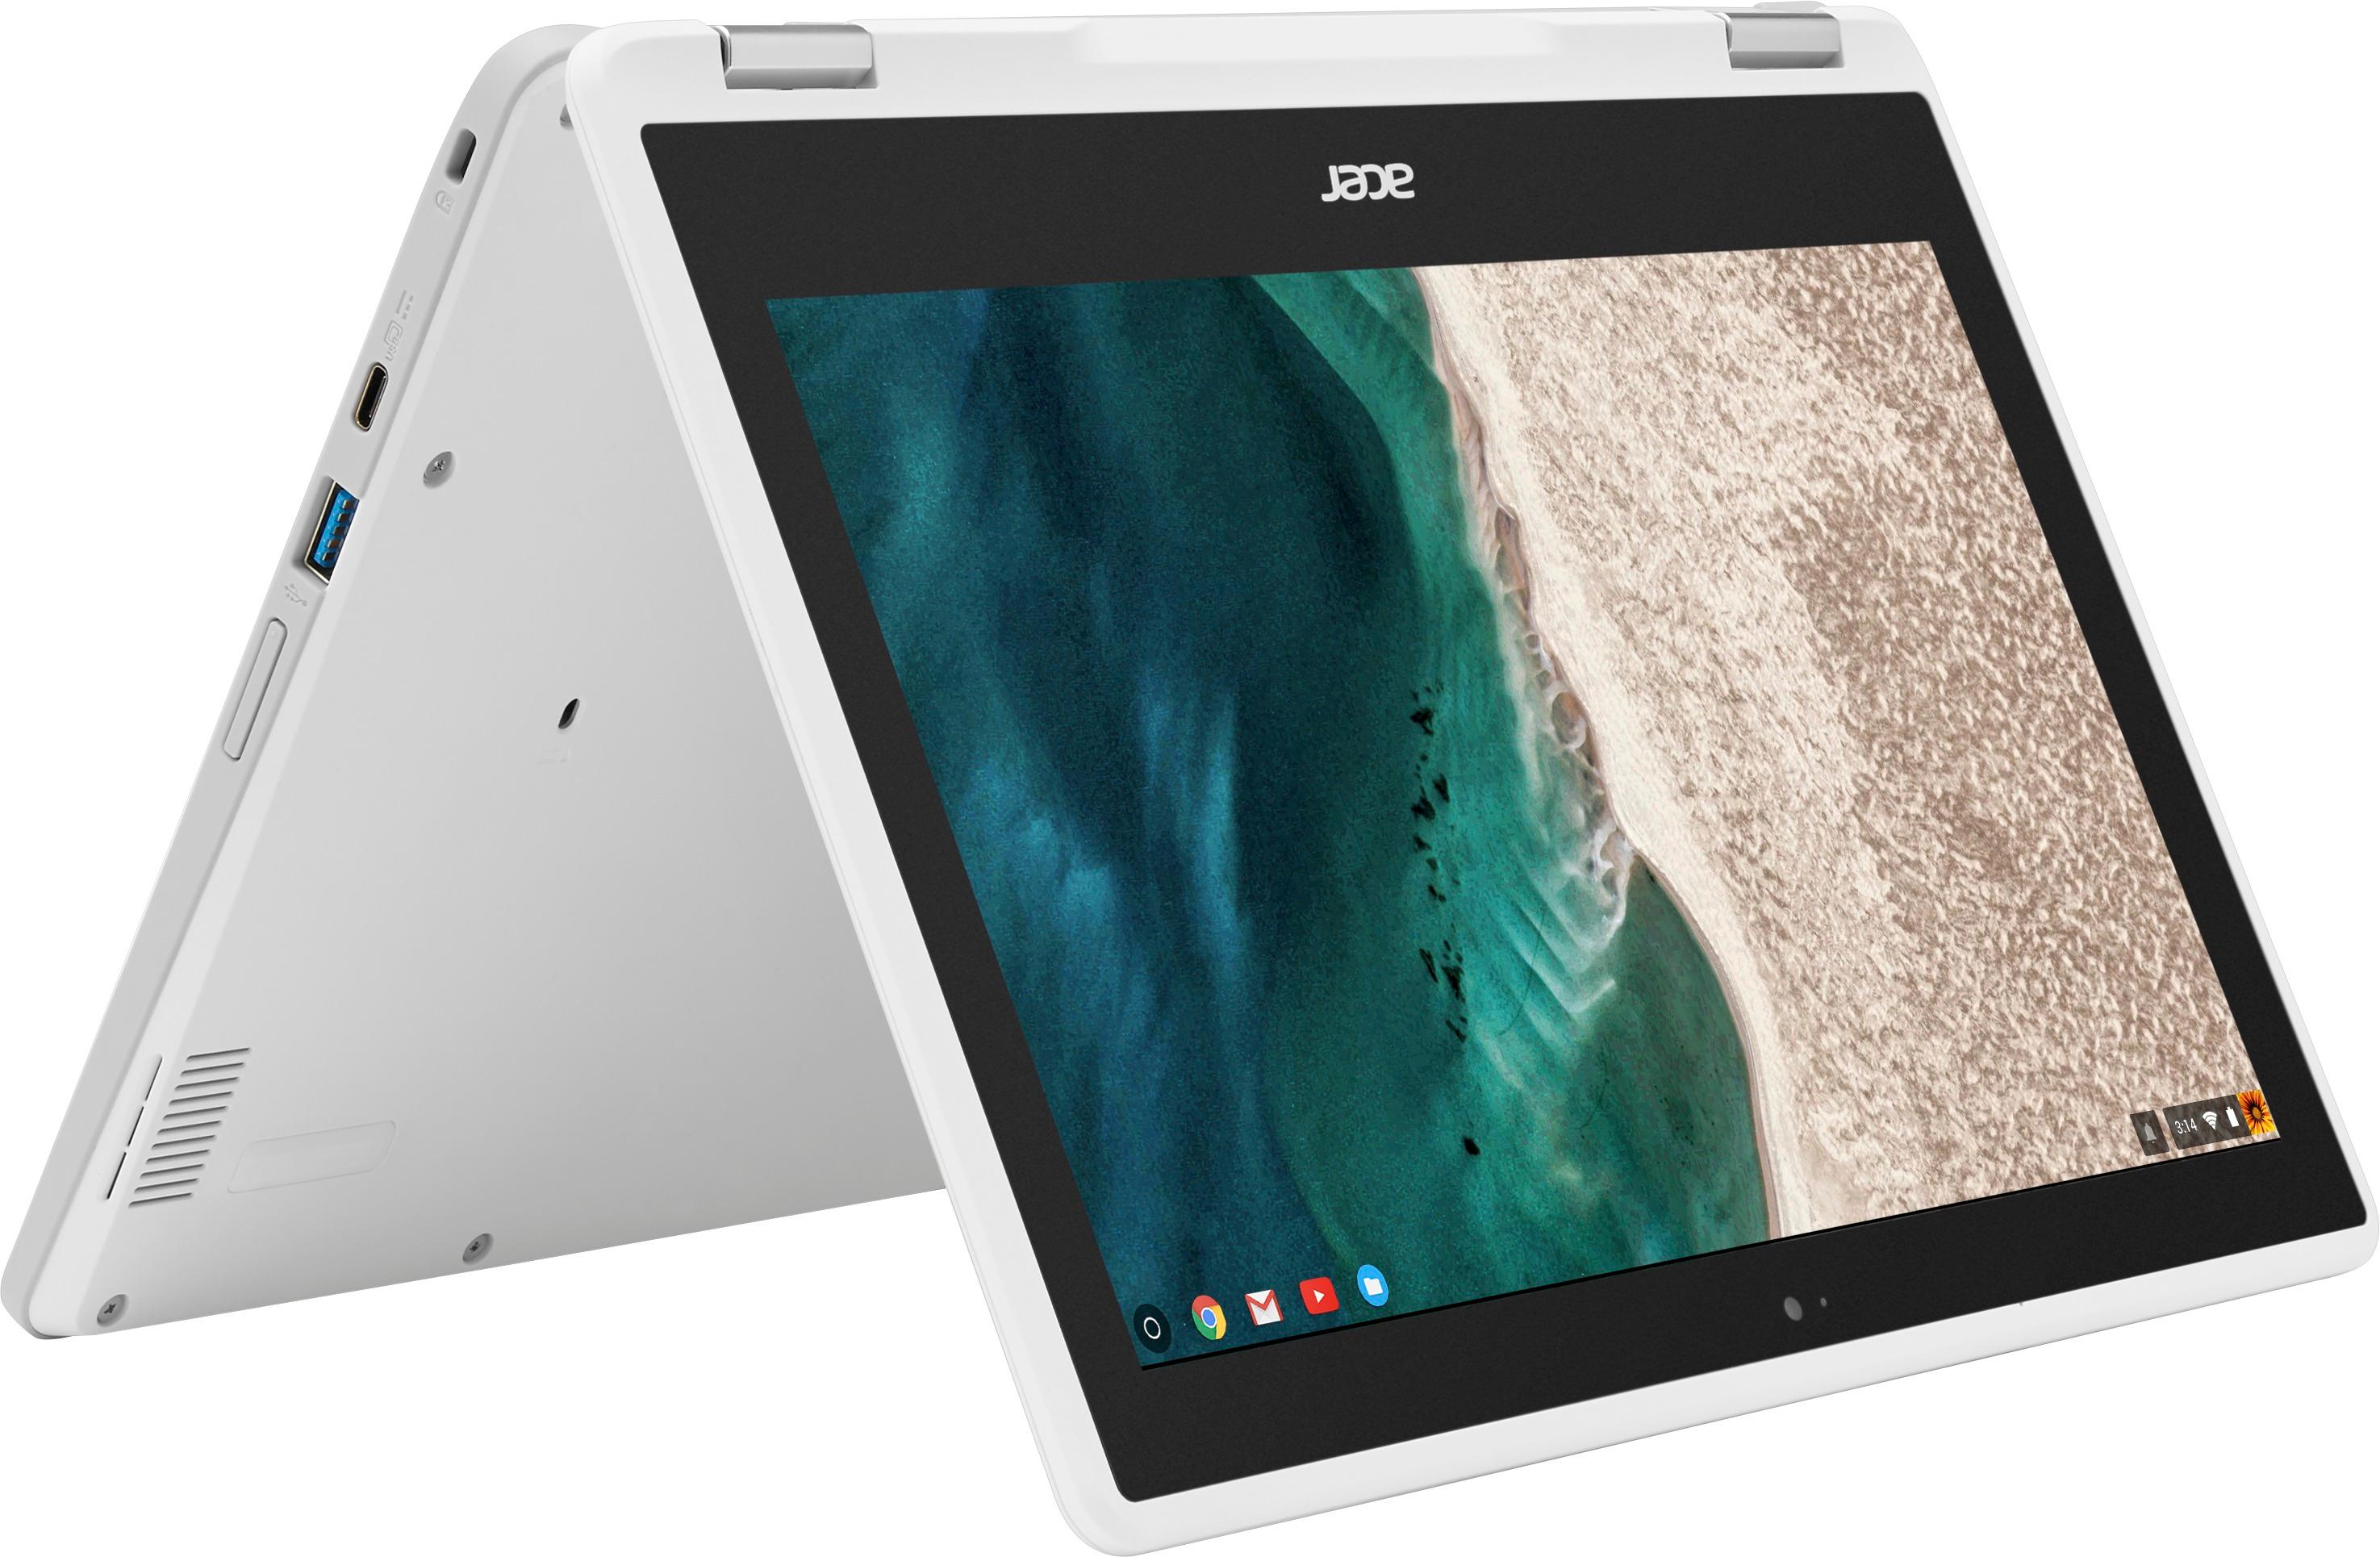 Acer Chromebook R 11 Convertible, 11.6-Inch HD Touch, Intel Celeron N3150, 4GB DDR3L, 32GB, Chrome, CB5-132T-C1LK by Acer - 6